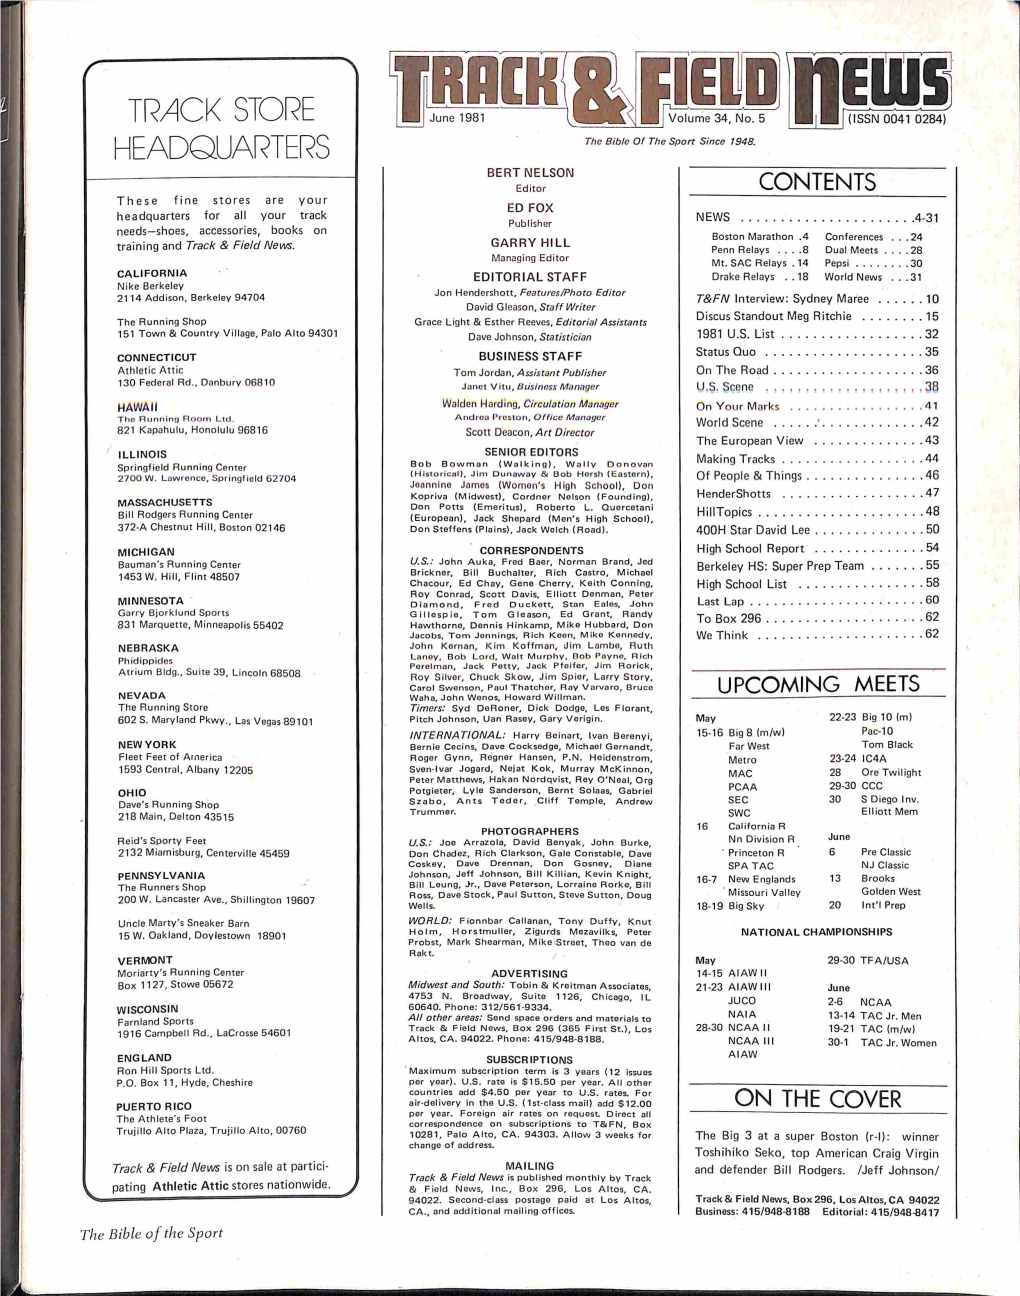 Track & Field News June 1981 Table of Contents